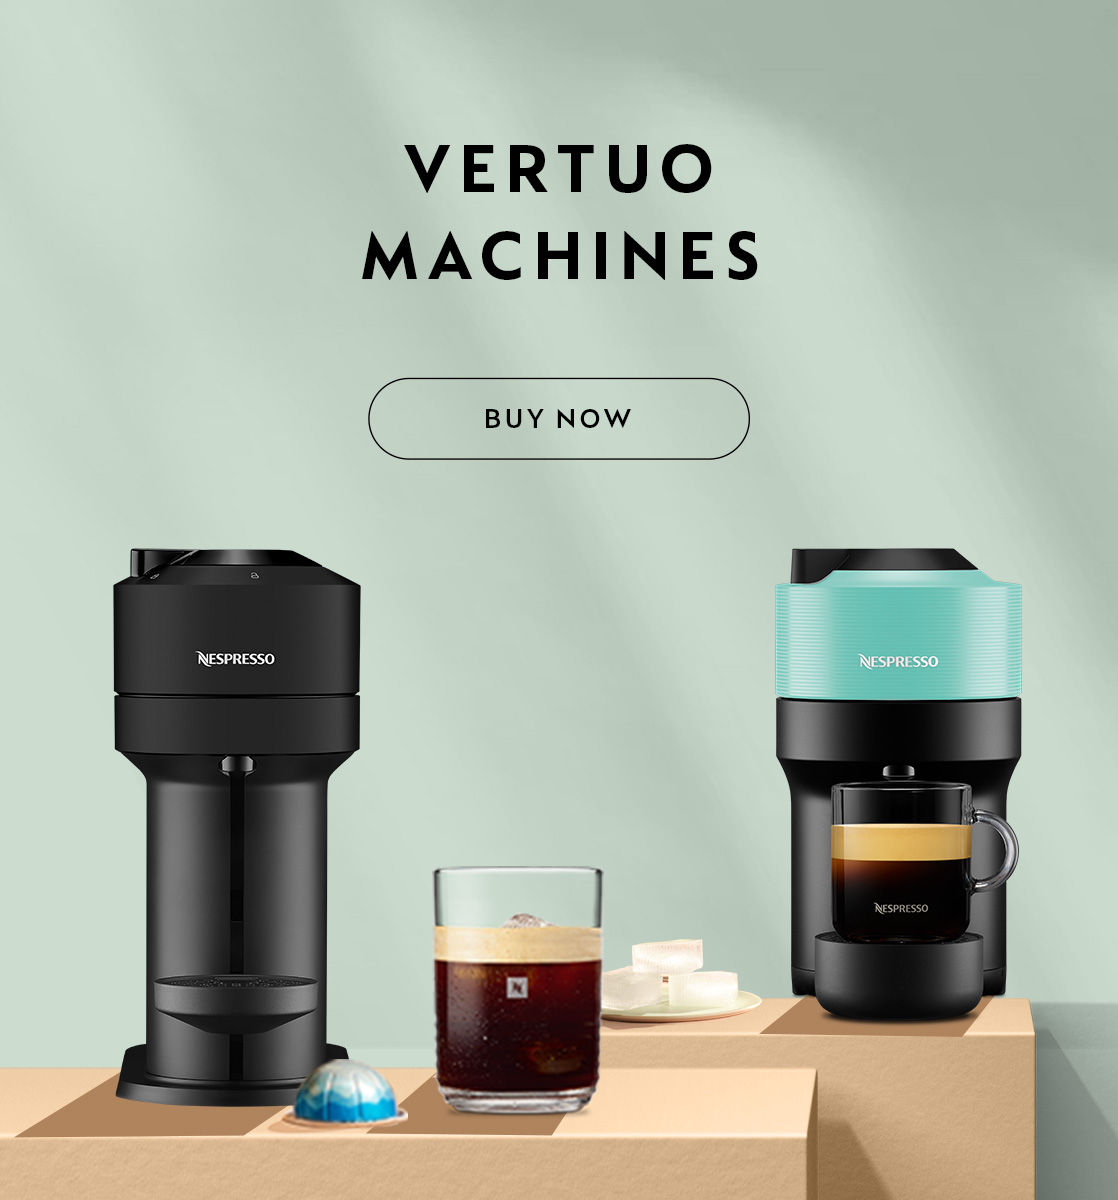 Vertuo Machines from €89